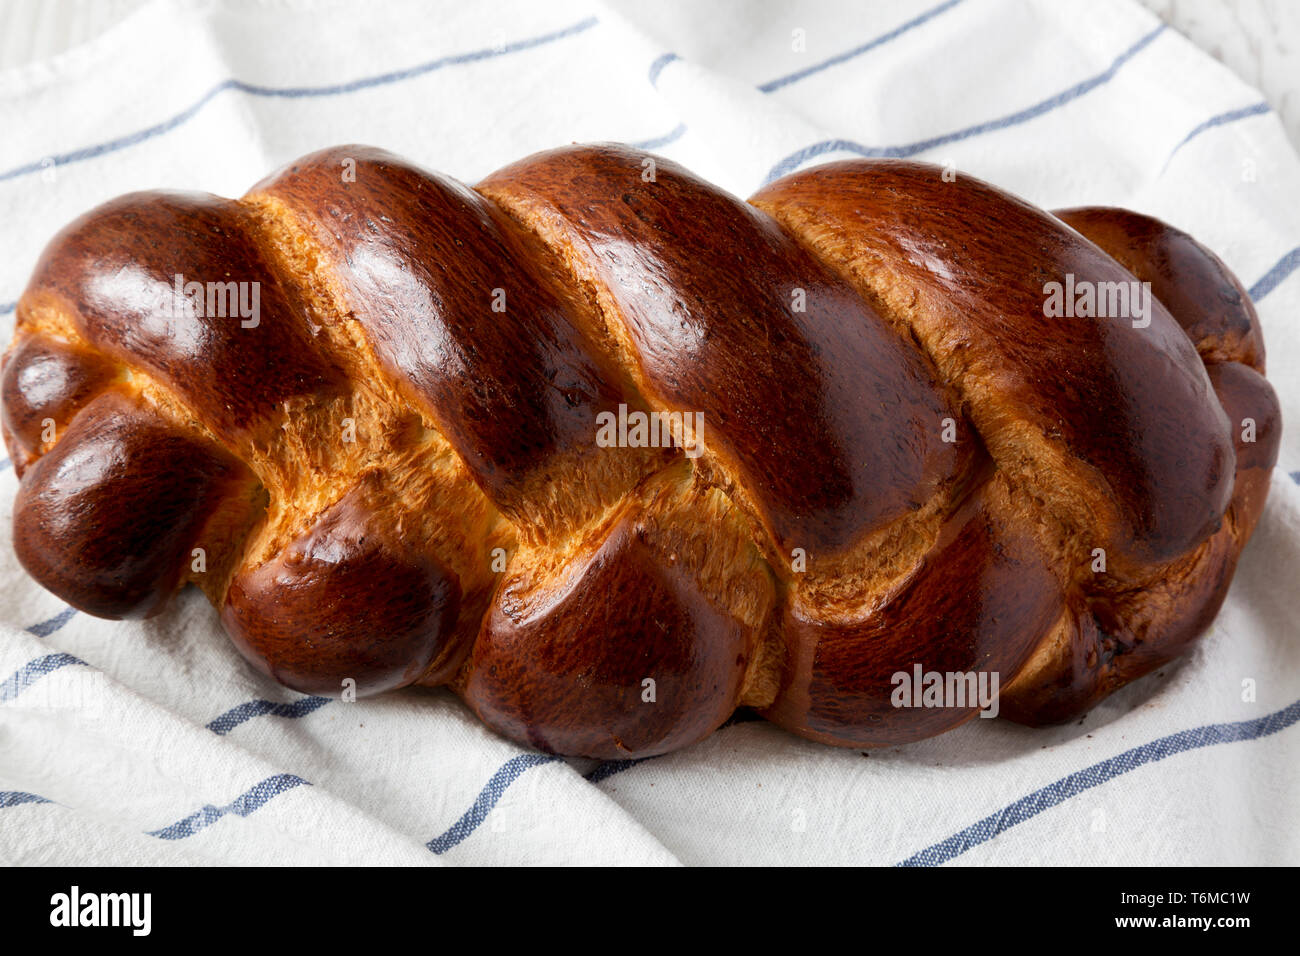 File:Challah bread on a pan.jpg - Wikimedia Commons